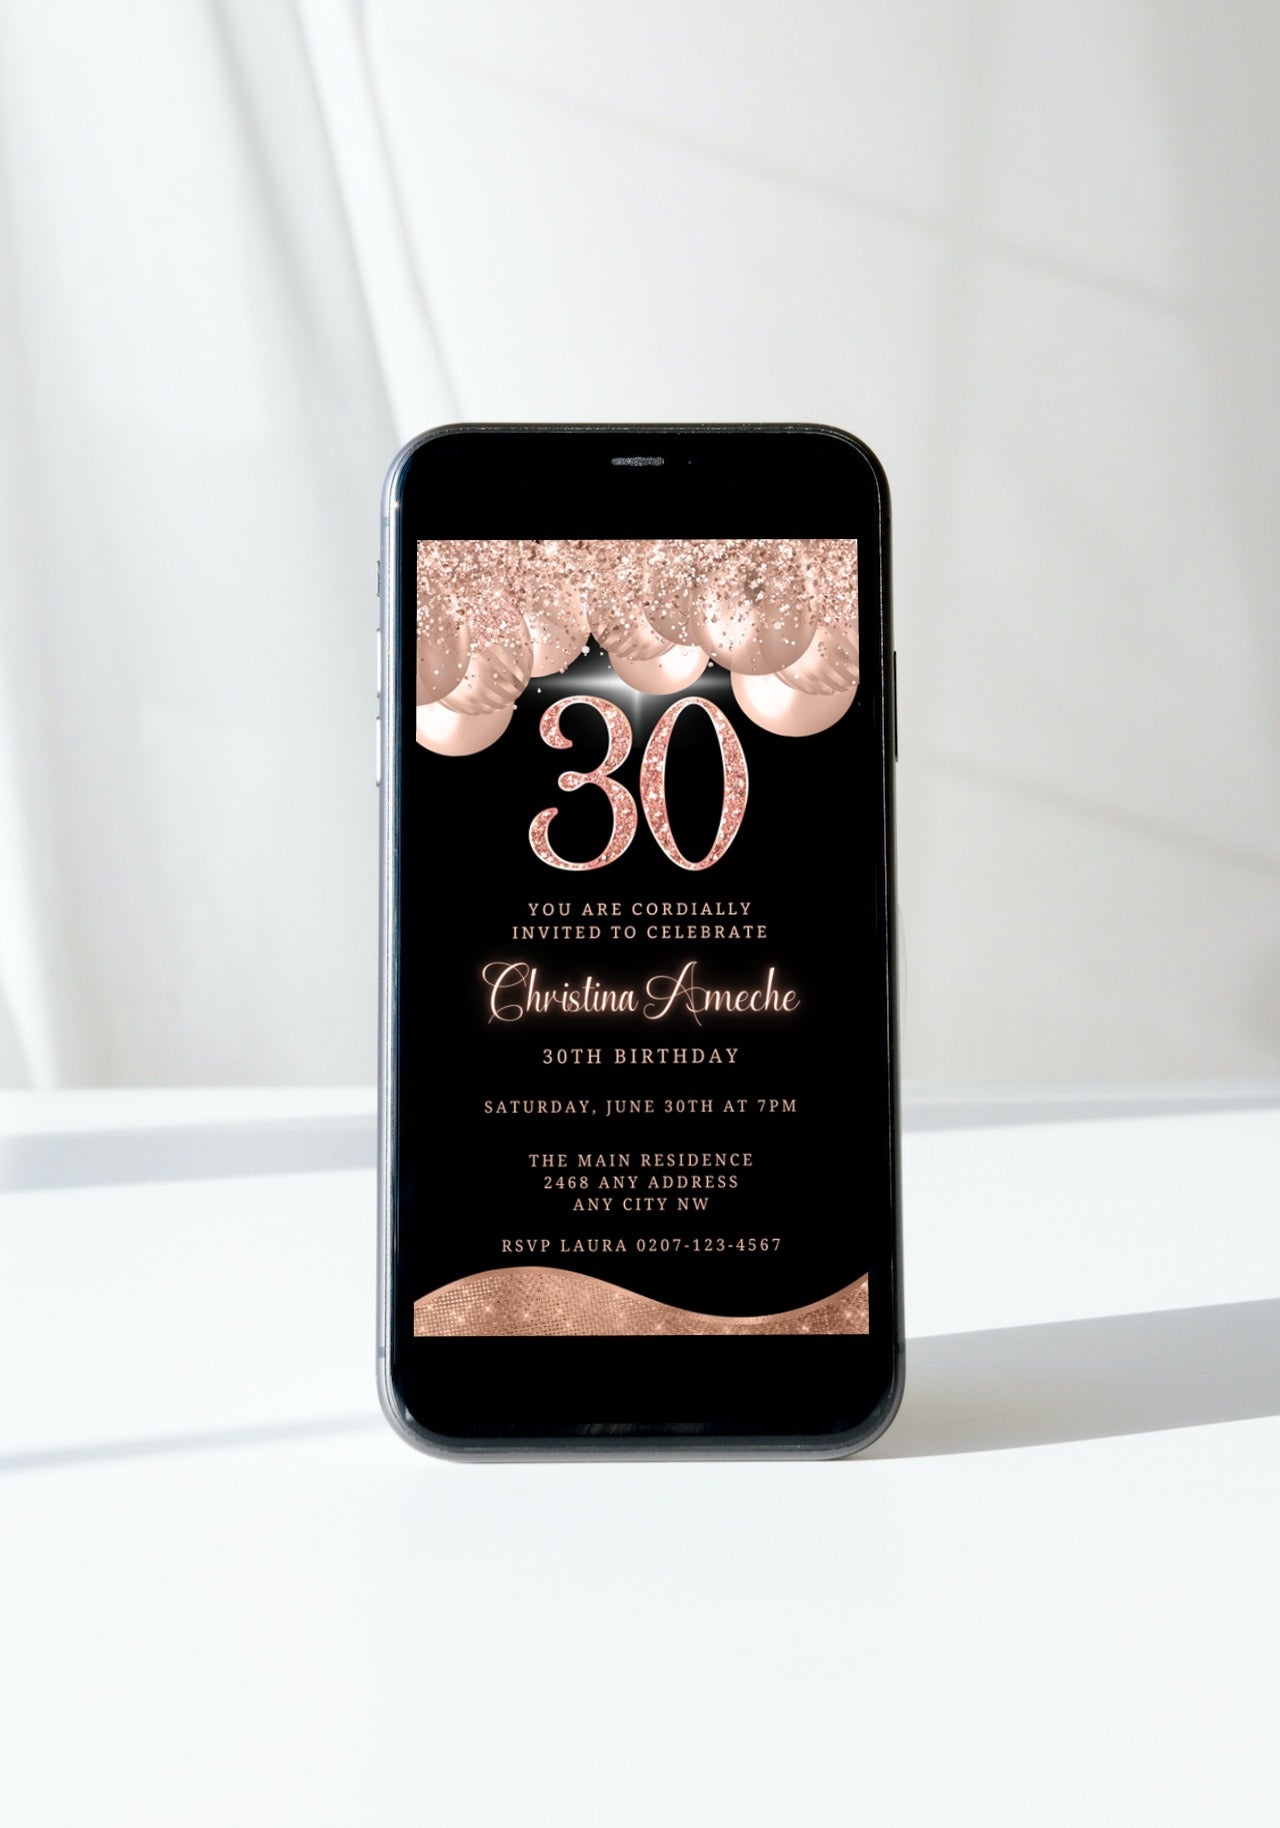 Customizable 30th Birthday Evite featuring rose gold balloons and glitter, designed for smartphones. Editable with Canva, ideal for digital sharing via text, email, or social media.